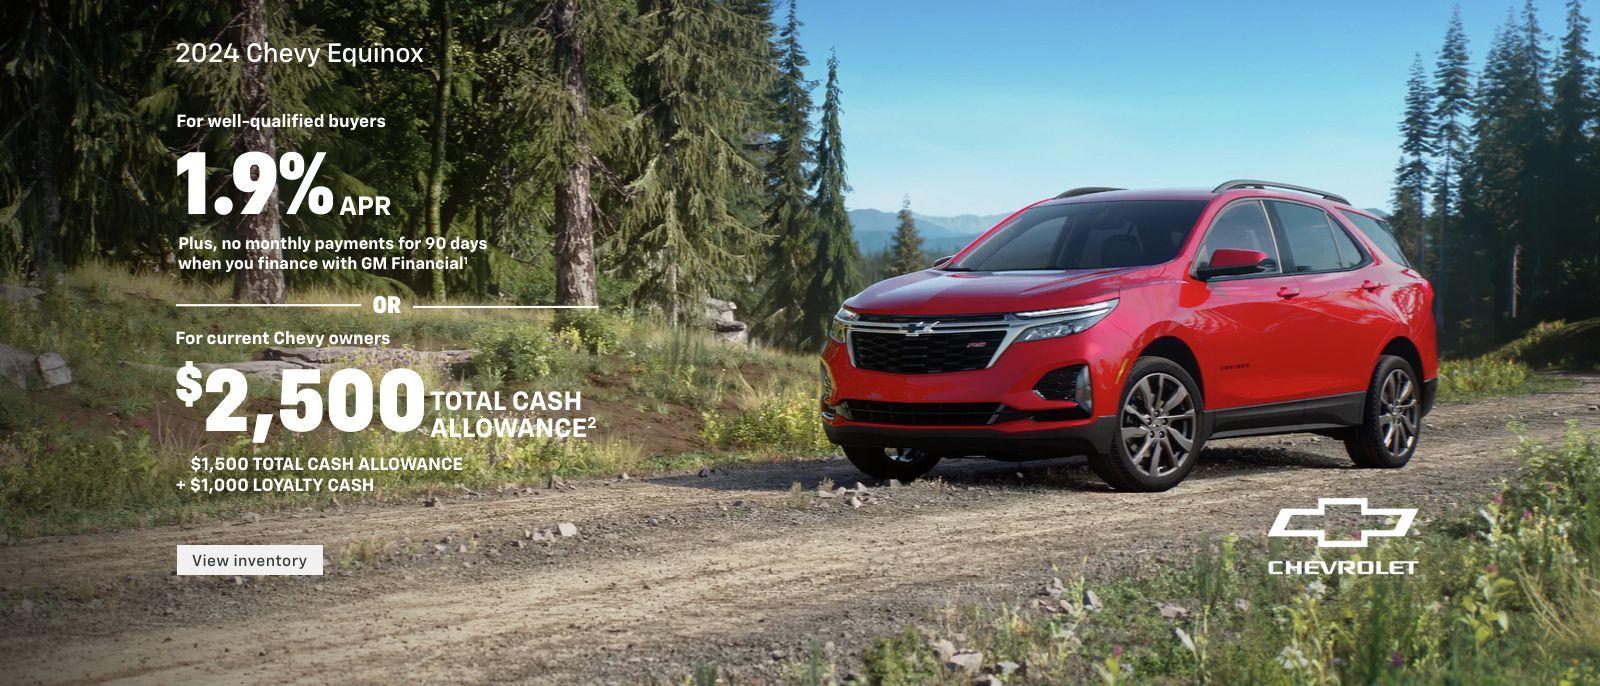 2024 Chevy Equinox. For well-qualified buyers 1.9% APR + no monthly payments for 90 days when you finance with GM Financial. Or, For current Chevy owners $2,500 total cash allowance. $1,500 total cash allowance + $1,000 loyalty cash